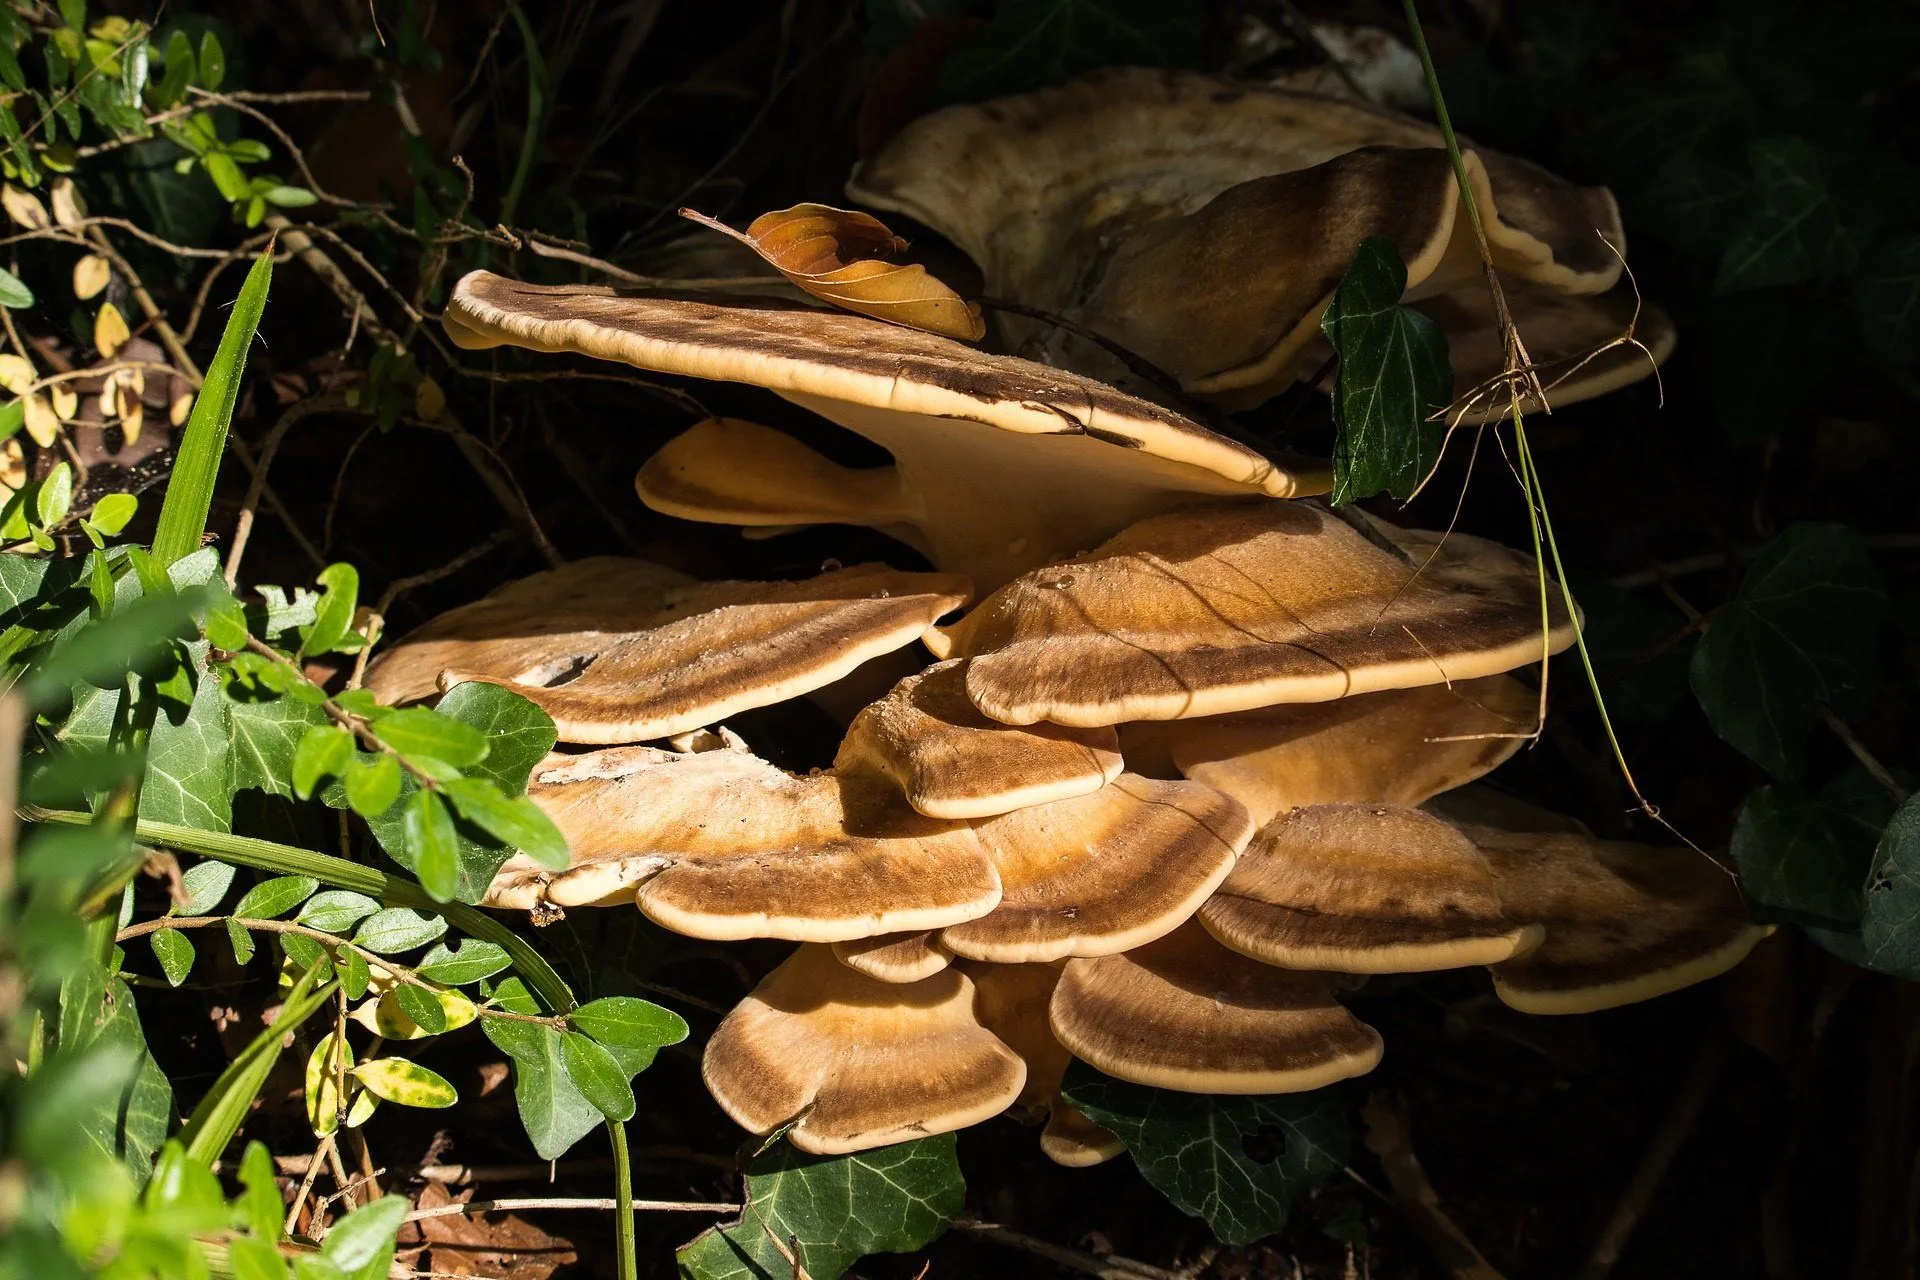 What Are Turkey Tail Mushrooms Good For?